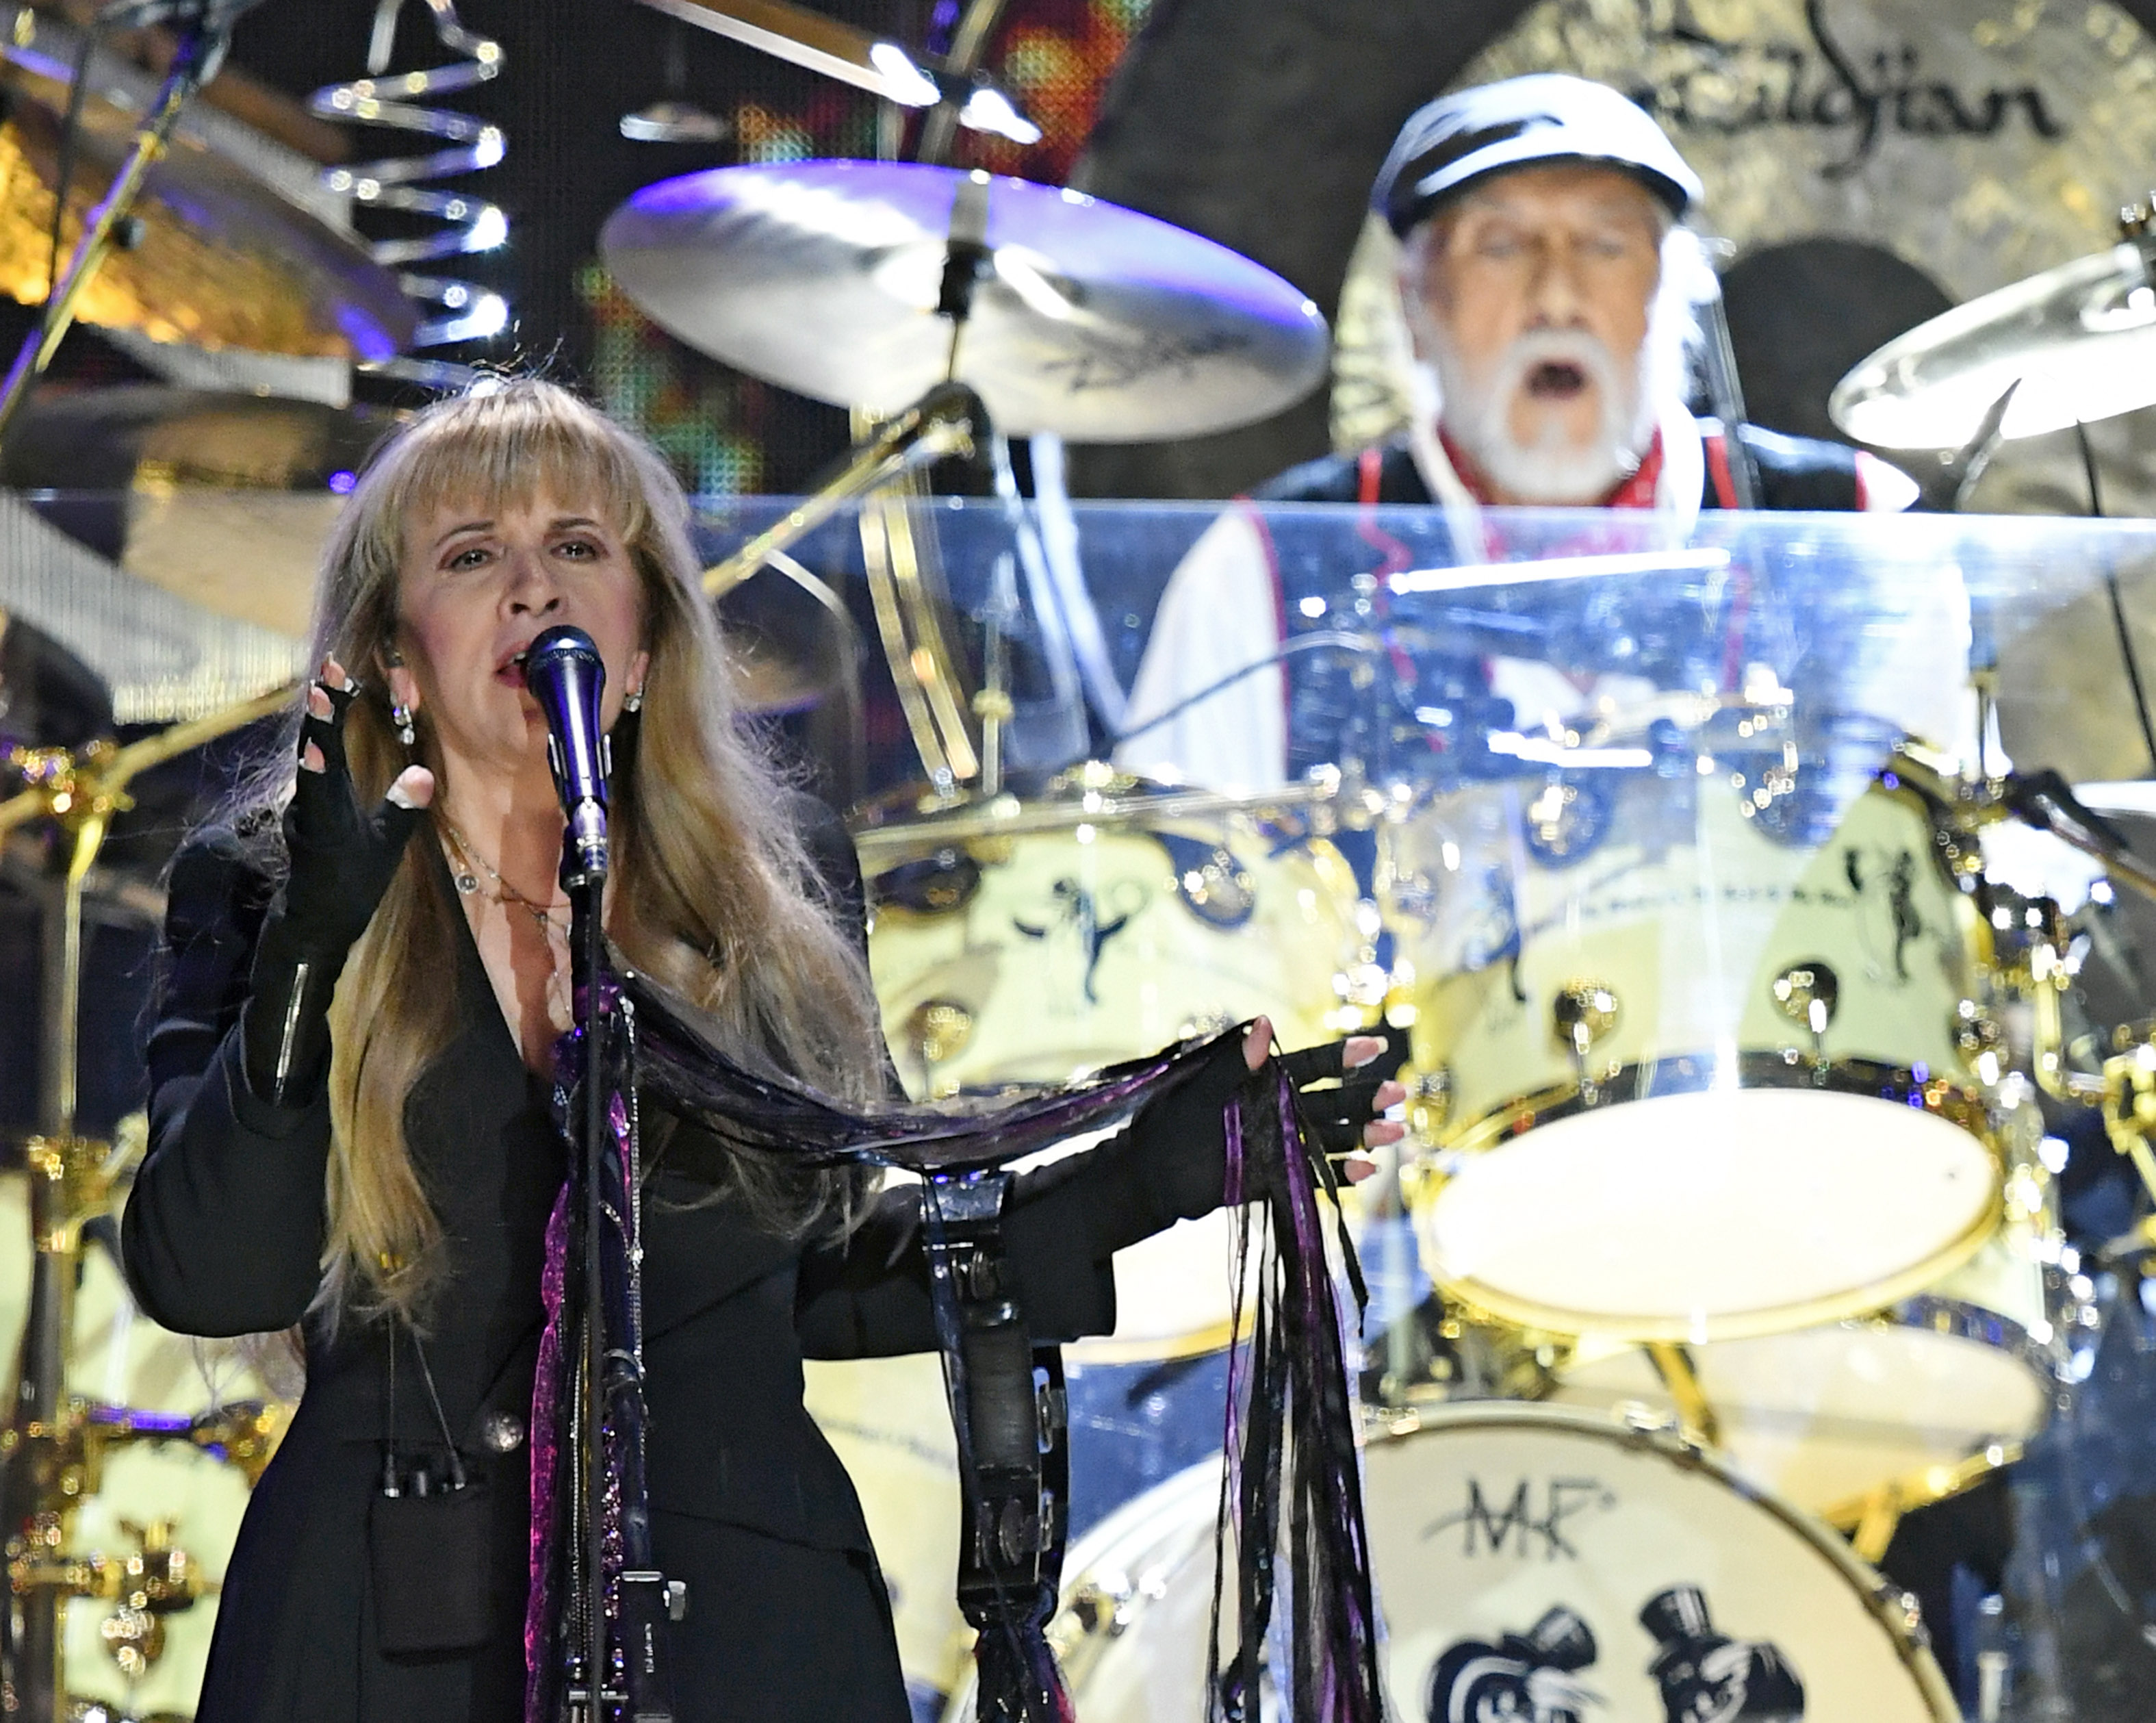 Singer Stevie Nicks and drummer Mick Fleetwood perform during the 2018 iHeartRadio Music Festival at T-Mobile Arena on September 21, 2018, in Las Vegas, Nevada. | Source: Getty Images